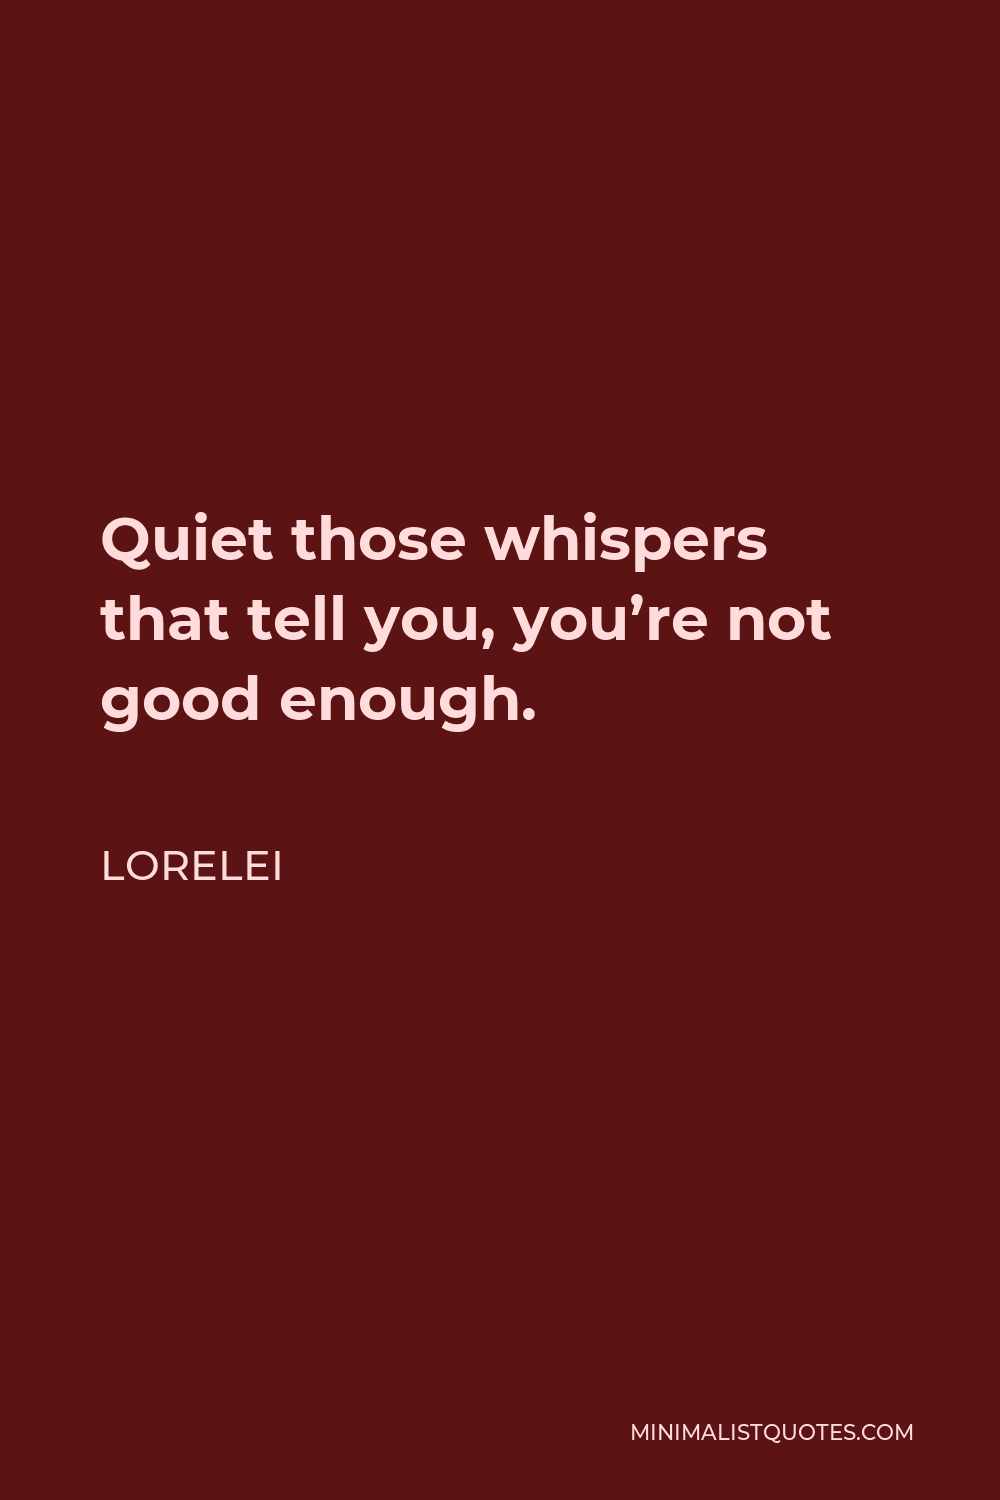 Lorelei Quote - Quiet those whispers that tell you, you’re not good enough.